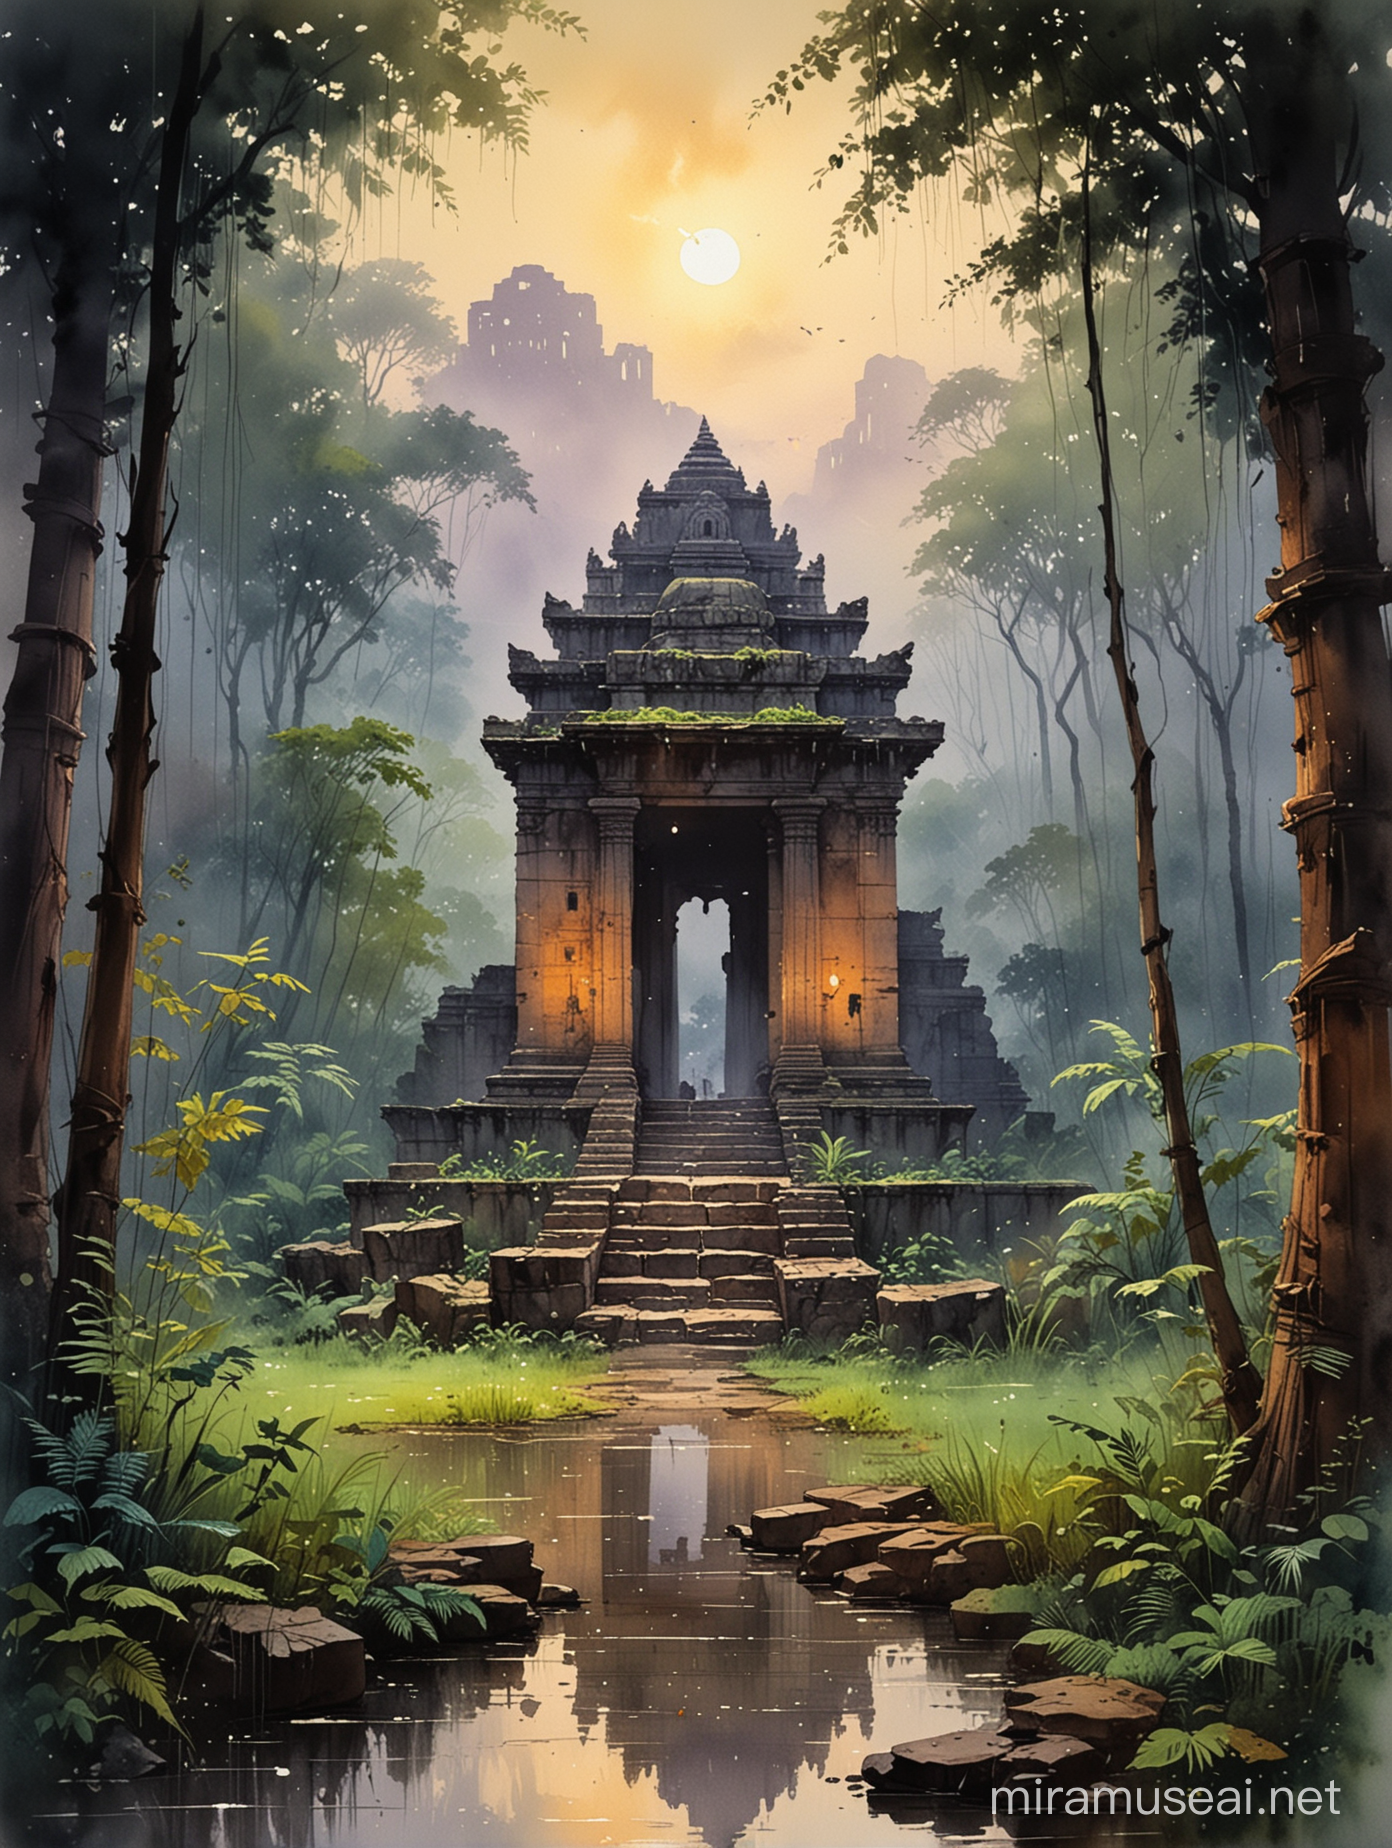 Mysterious Dusk Indian Jungle Aquarelle Painting with Ancient Temple Ruins